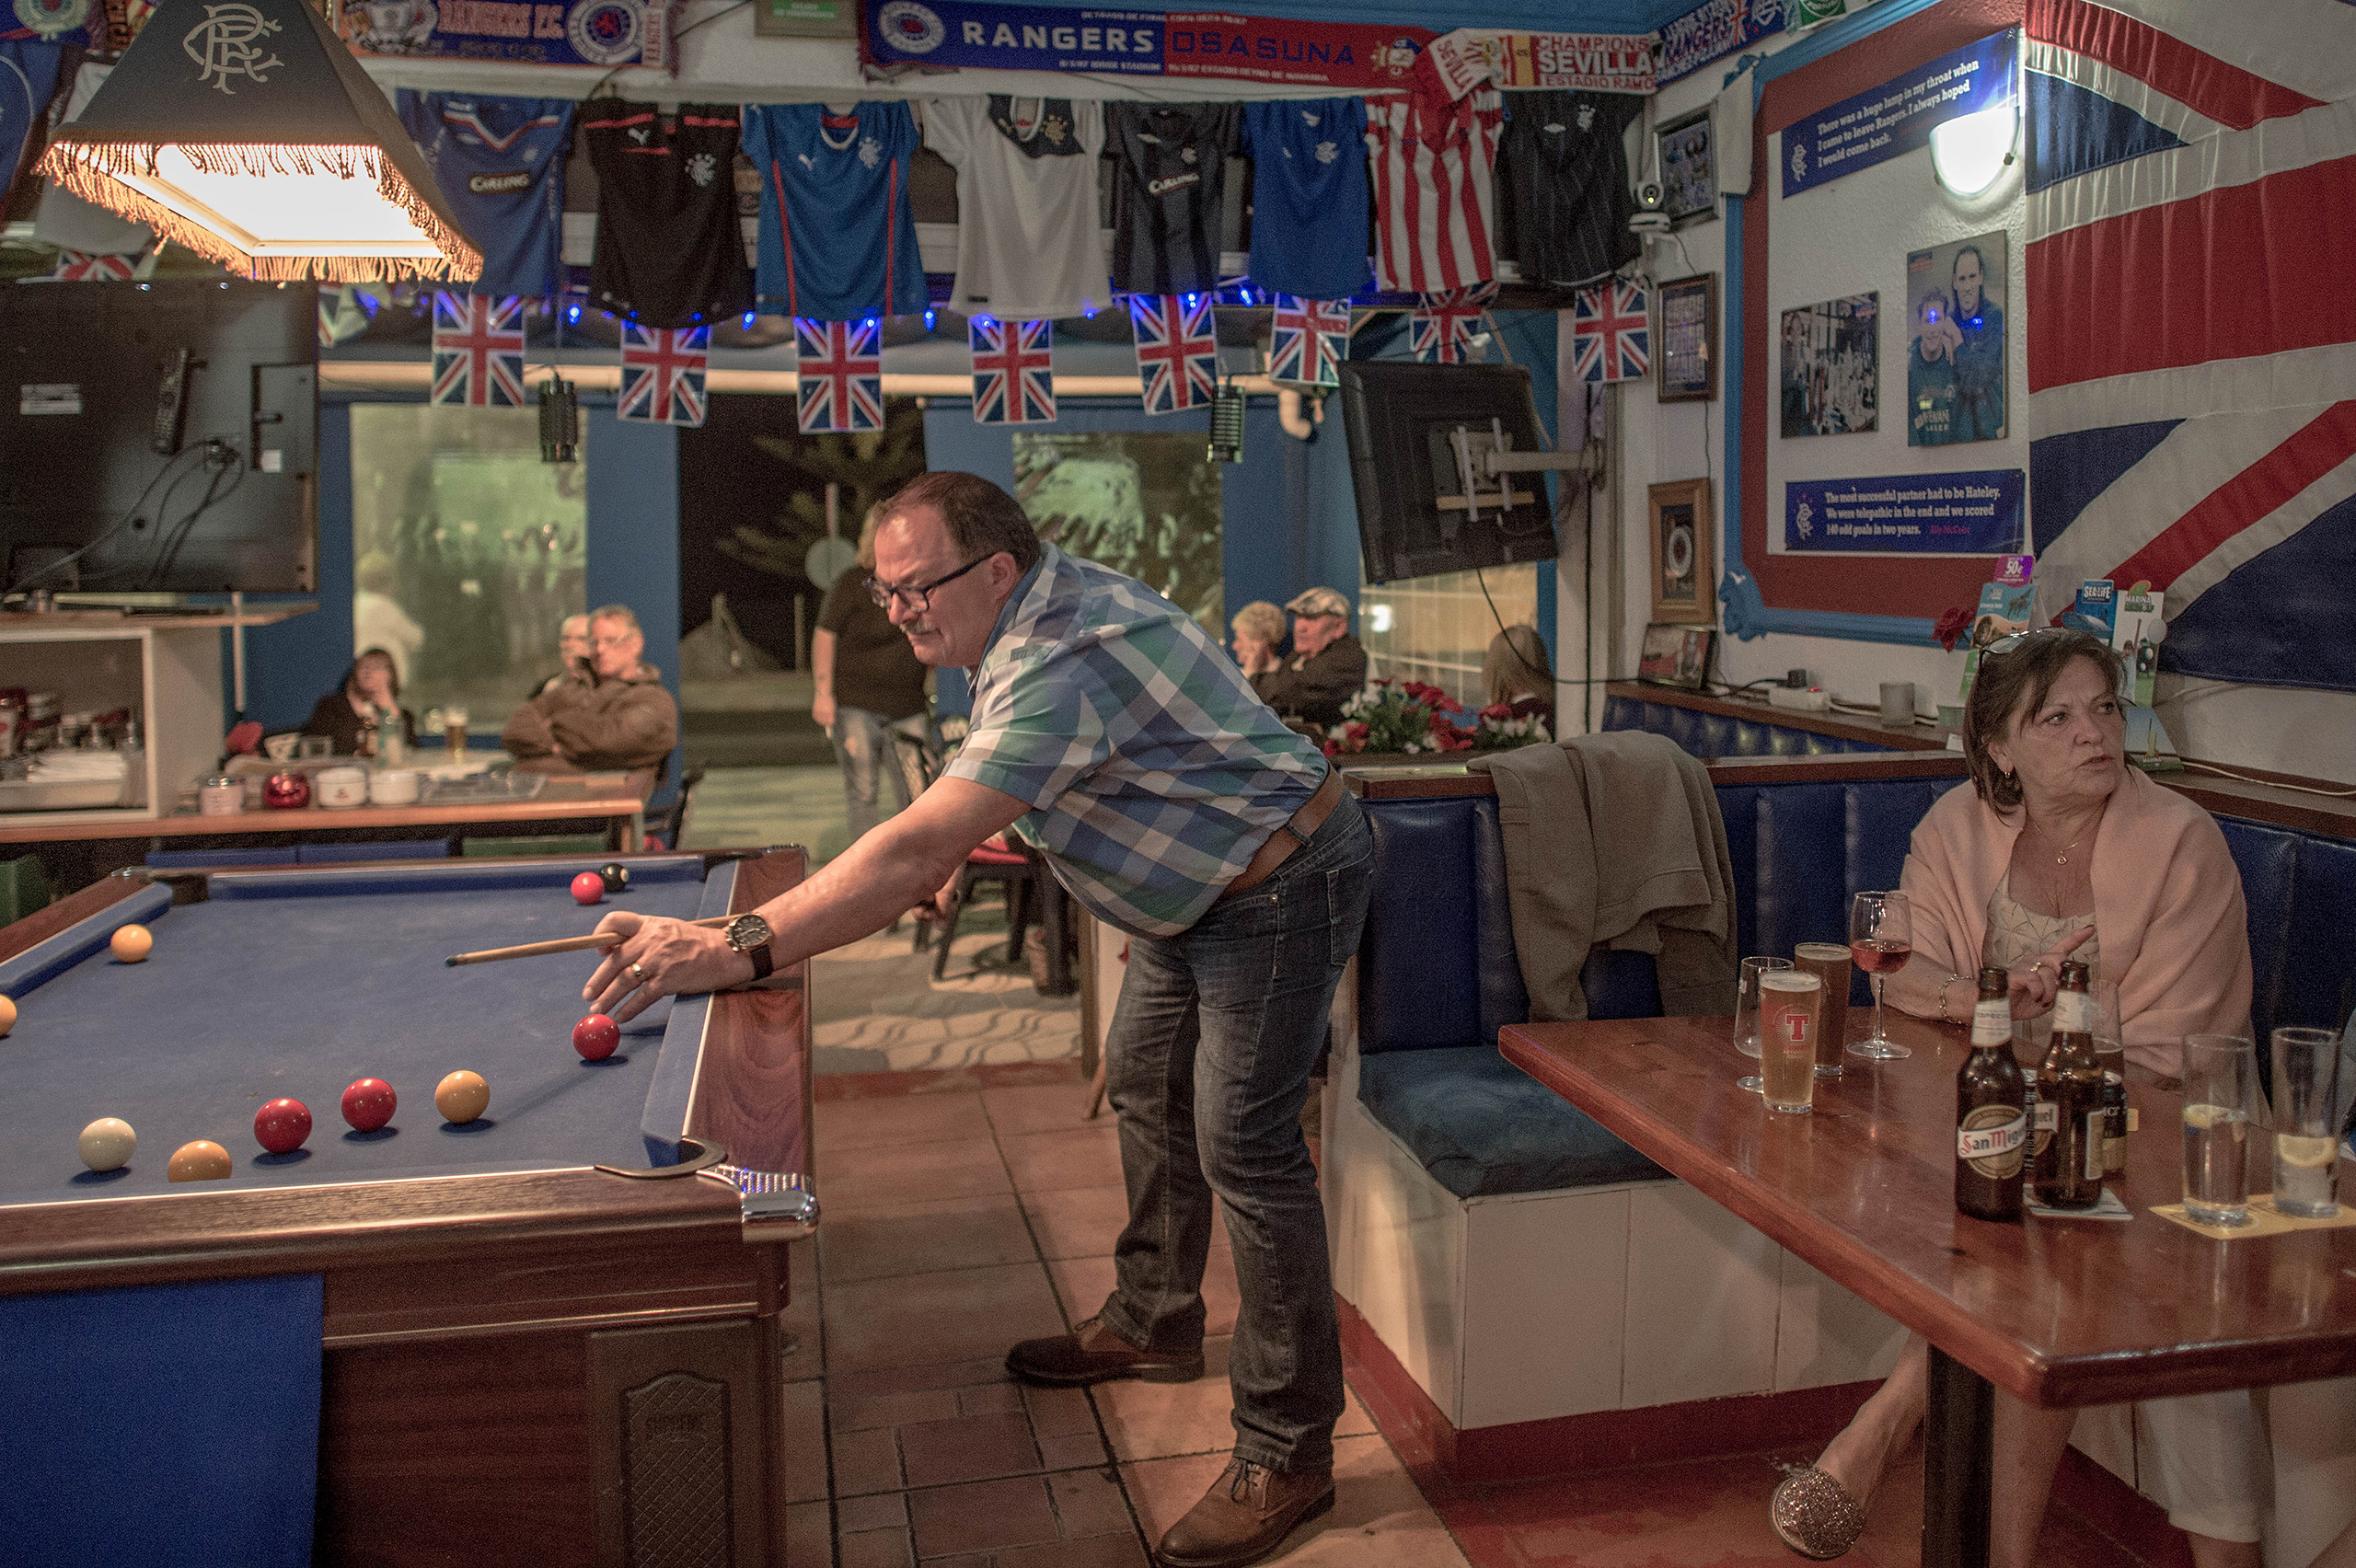 British tourists play pool at a English bar in Benalmadena, Spain, on March 17, 2016. Spain is Europe's top destination for British expats. (David Ramos—Getty Images)